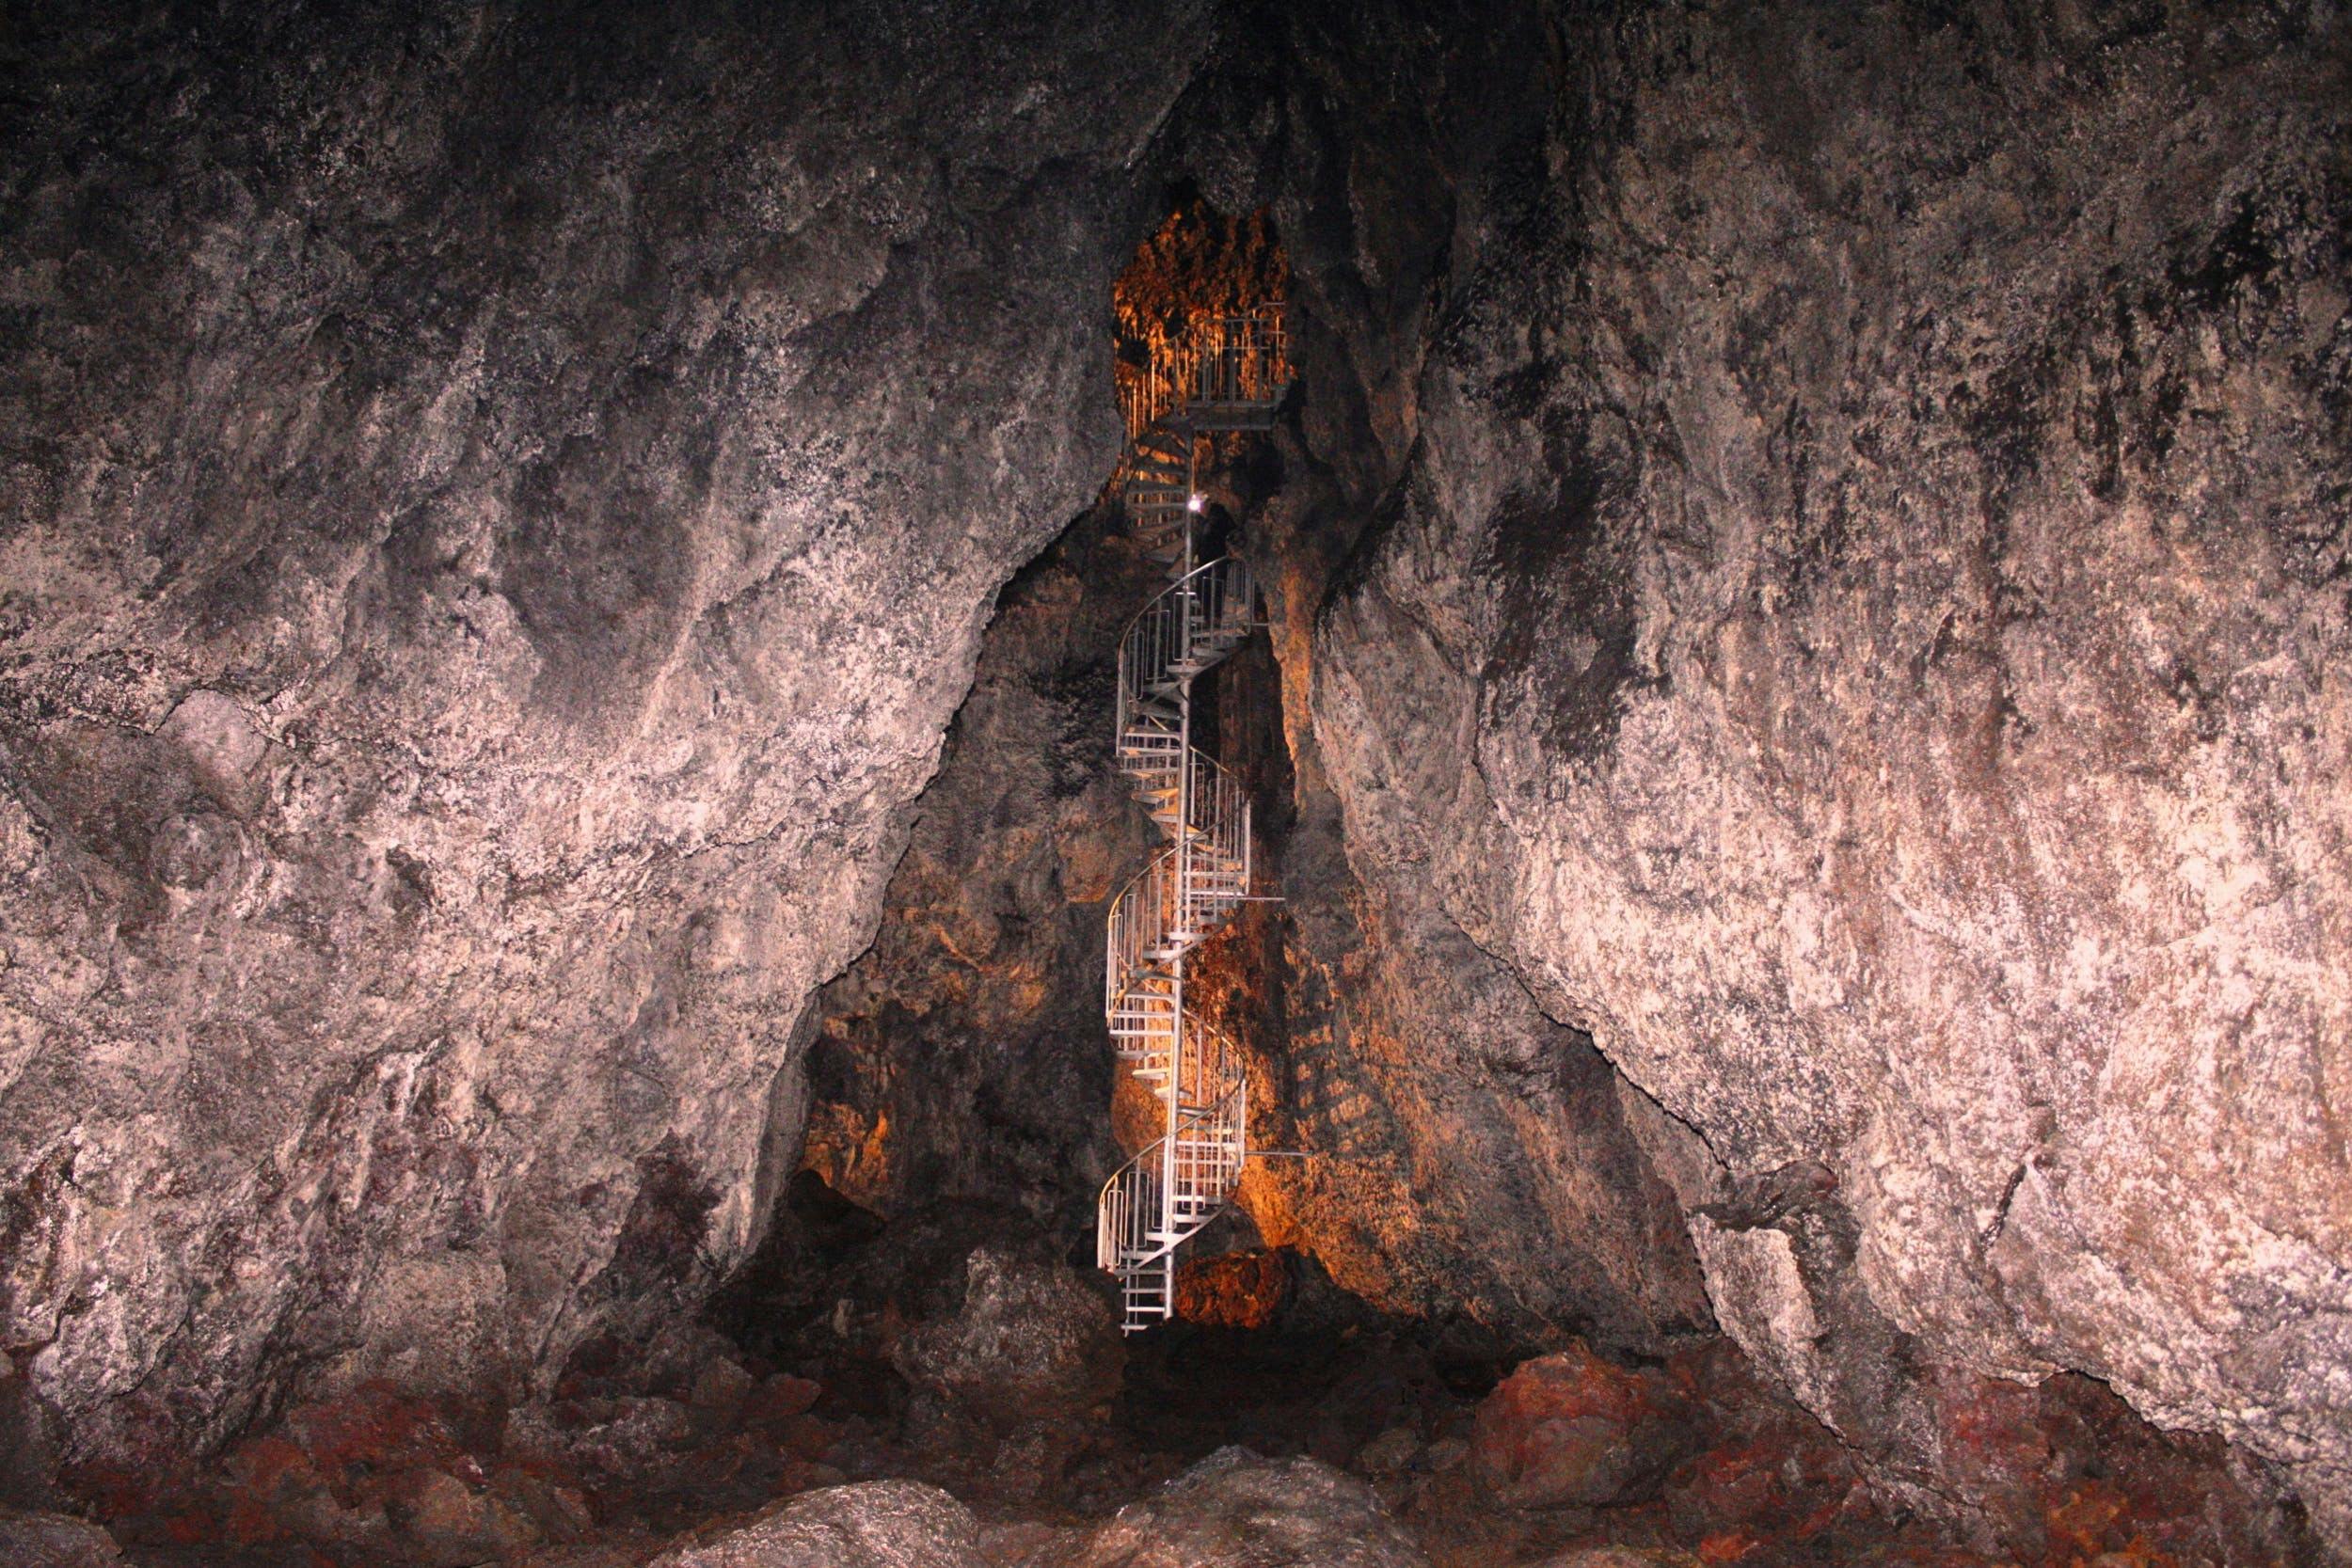 A staircase in a lava cave